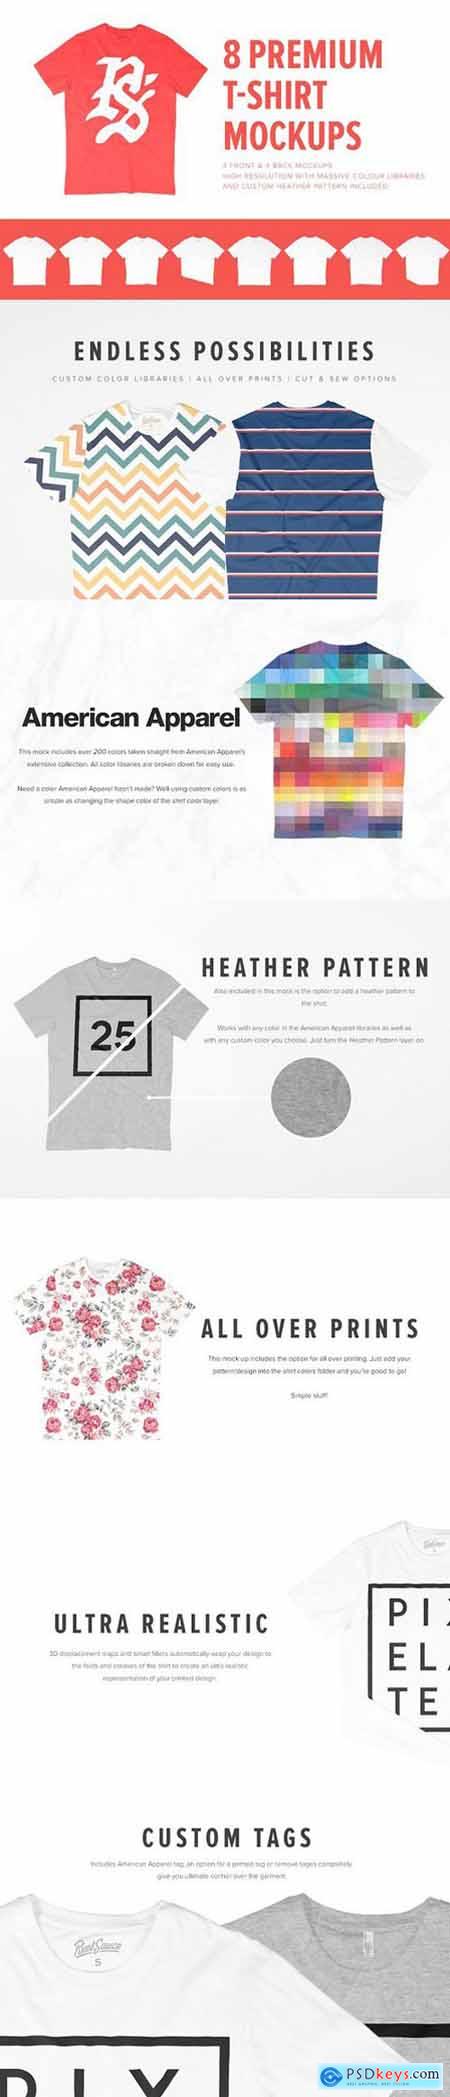 Apparel » page 10 » Free Download Photoshop Vector Stock image Via ...